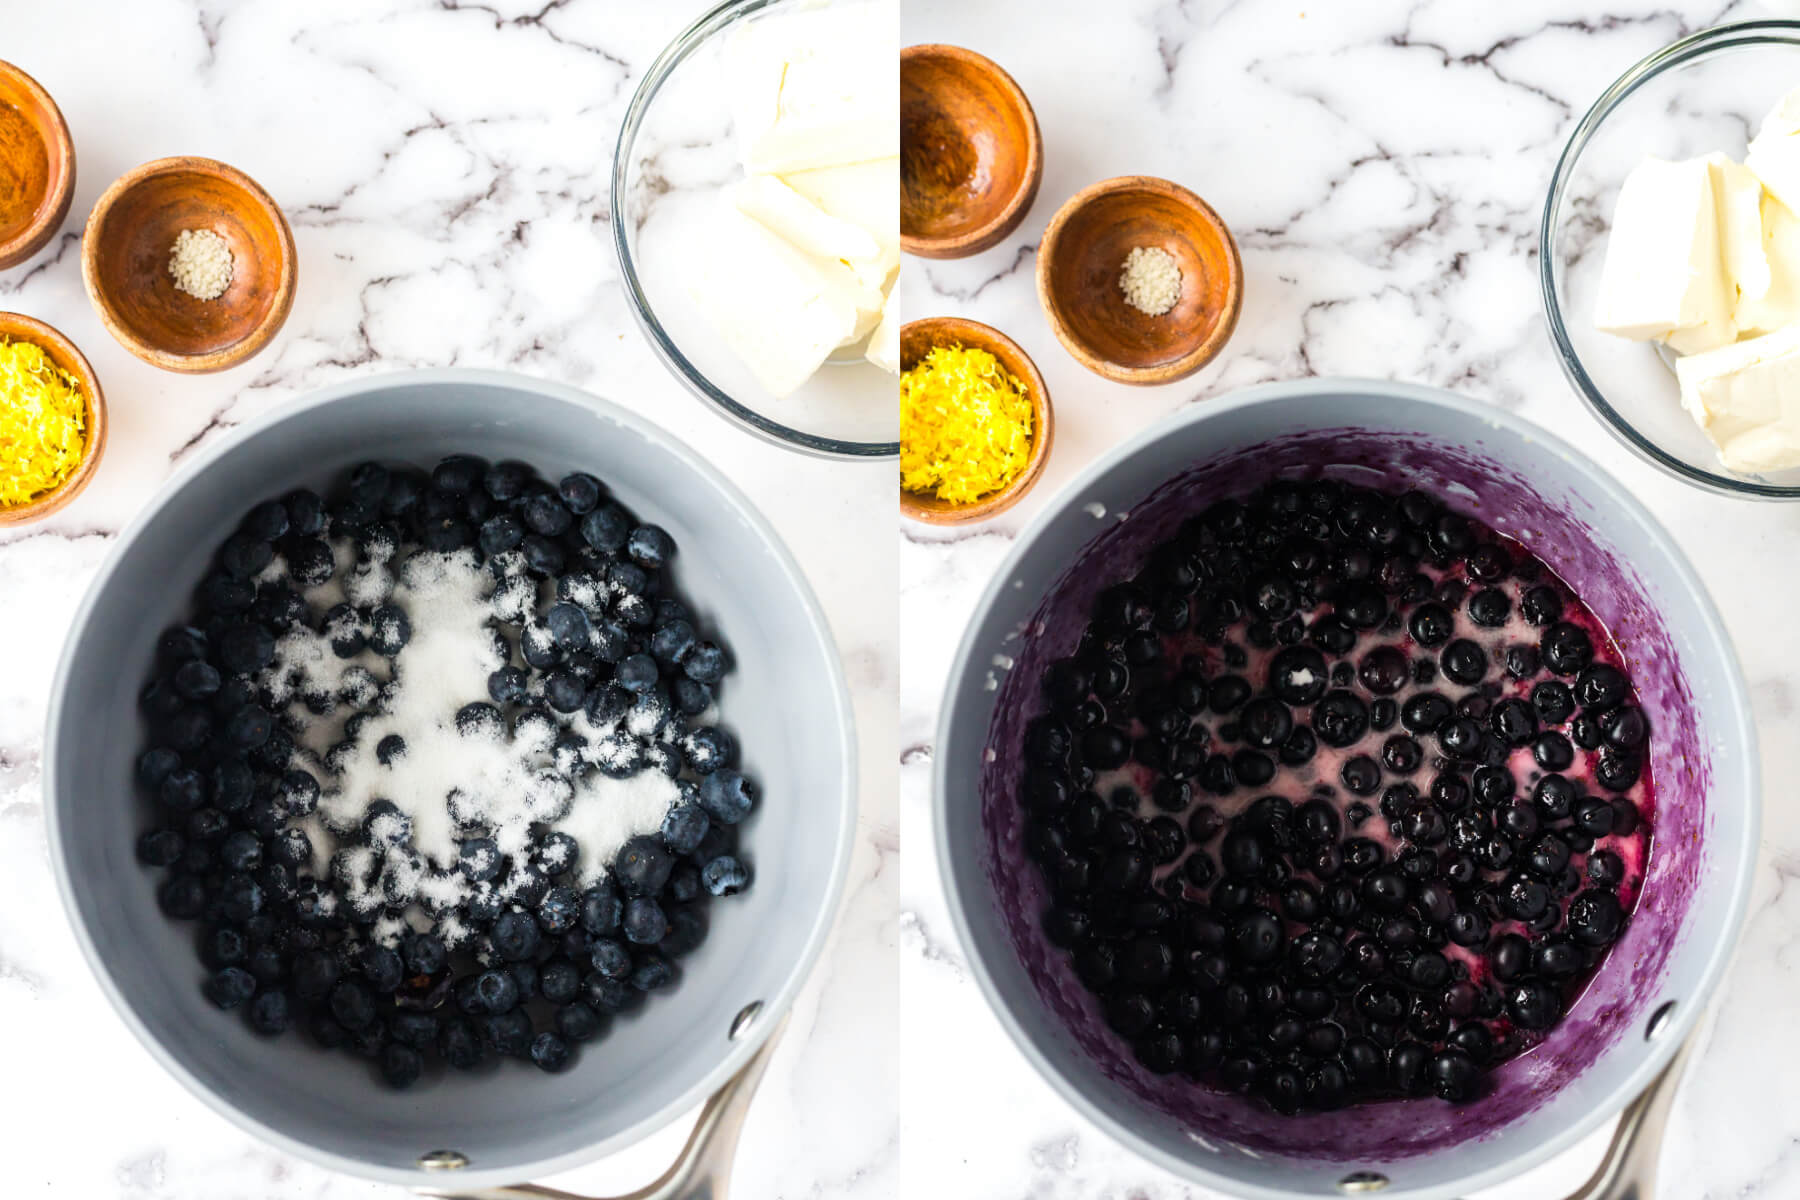 Process images showing how to make blueberry compote.